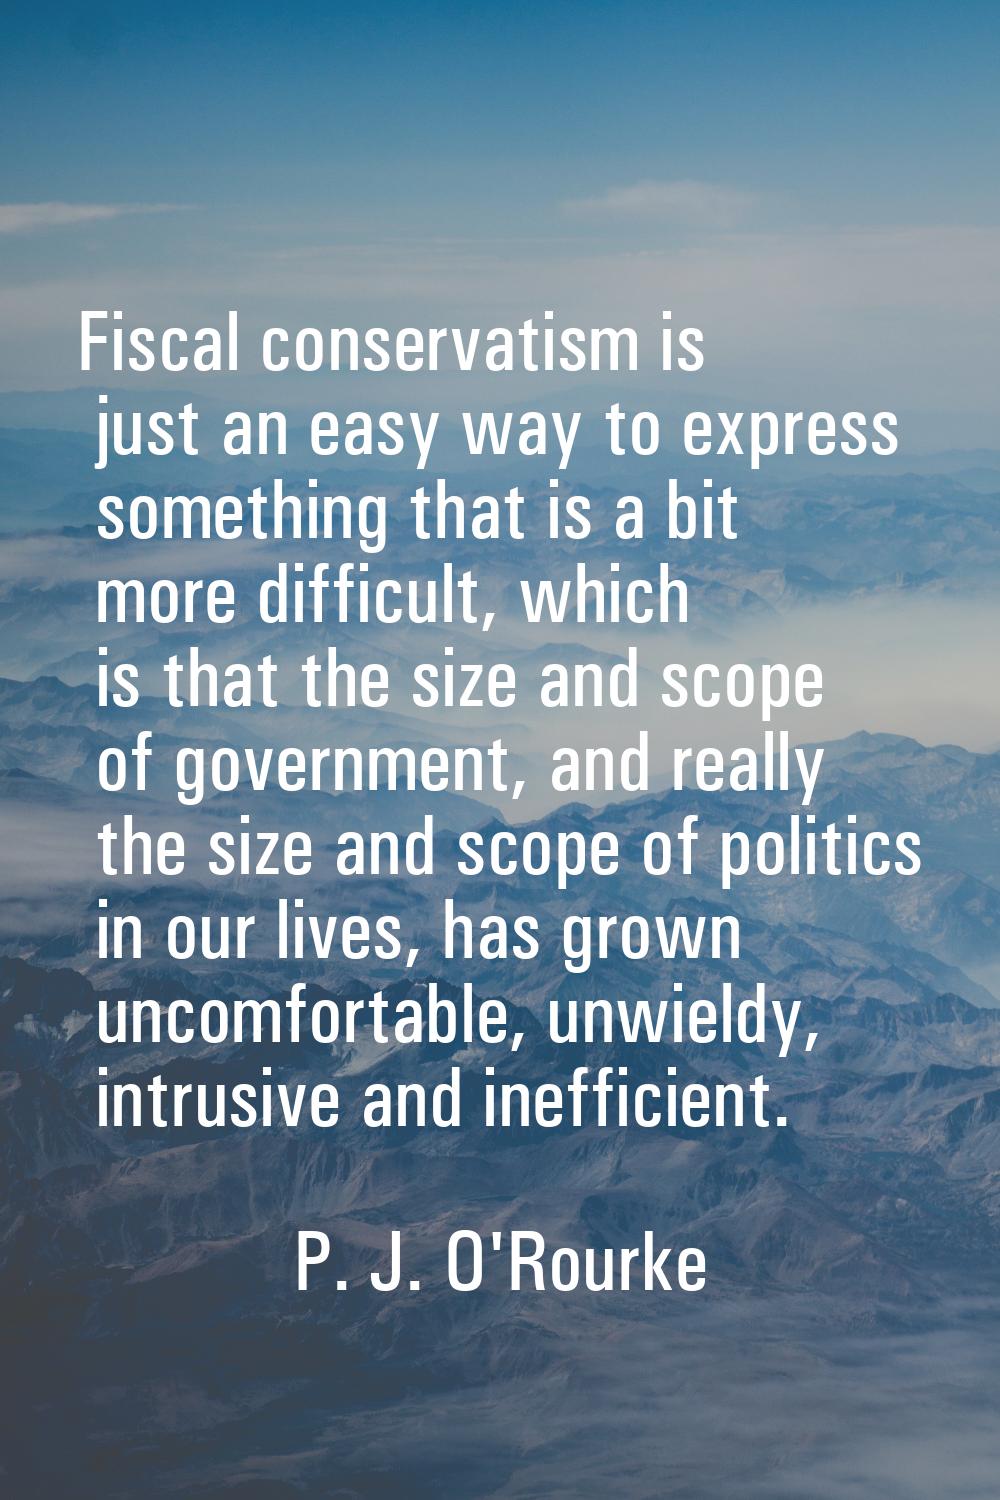 Fiscal conservatism is just an easy way to express something that is a bit more difficult, which is